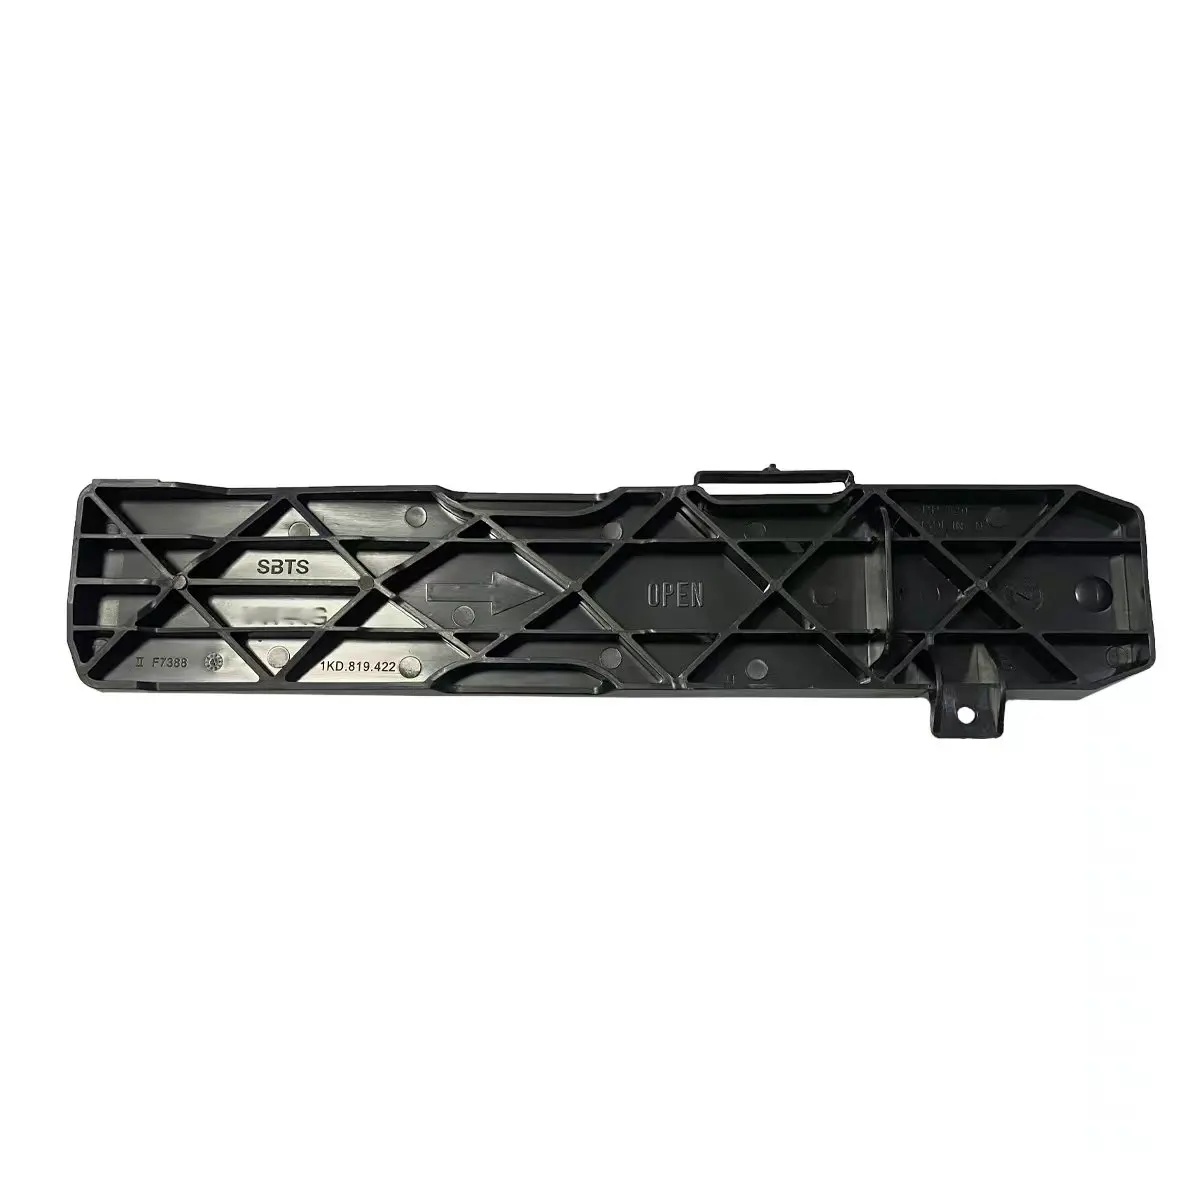 1K0819422B ABS Car Engine Air Filter Protective Cover for Tiguan Jetta MK5 Golf - £8.44 GBP